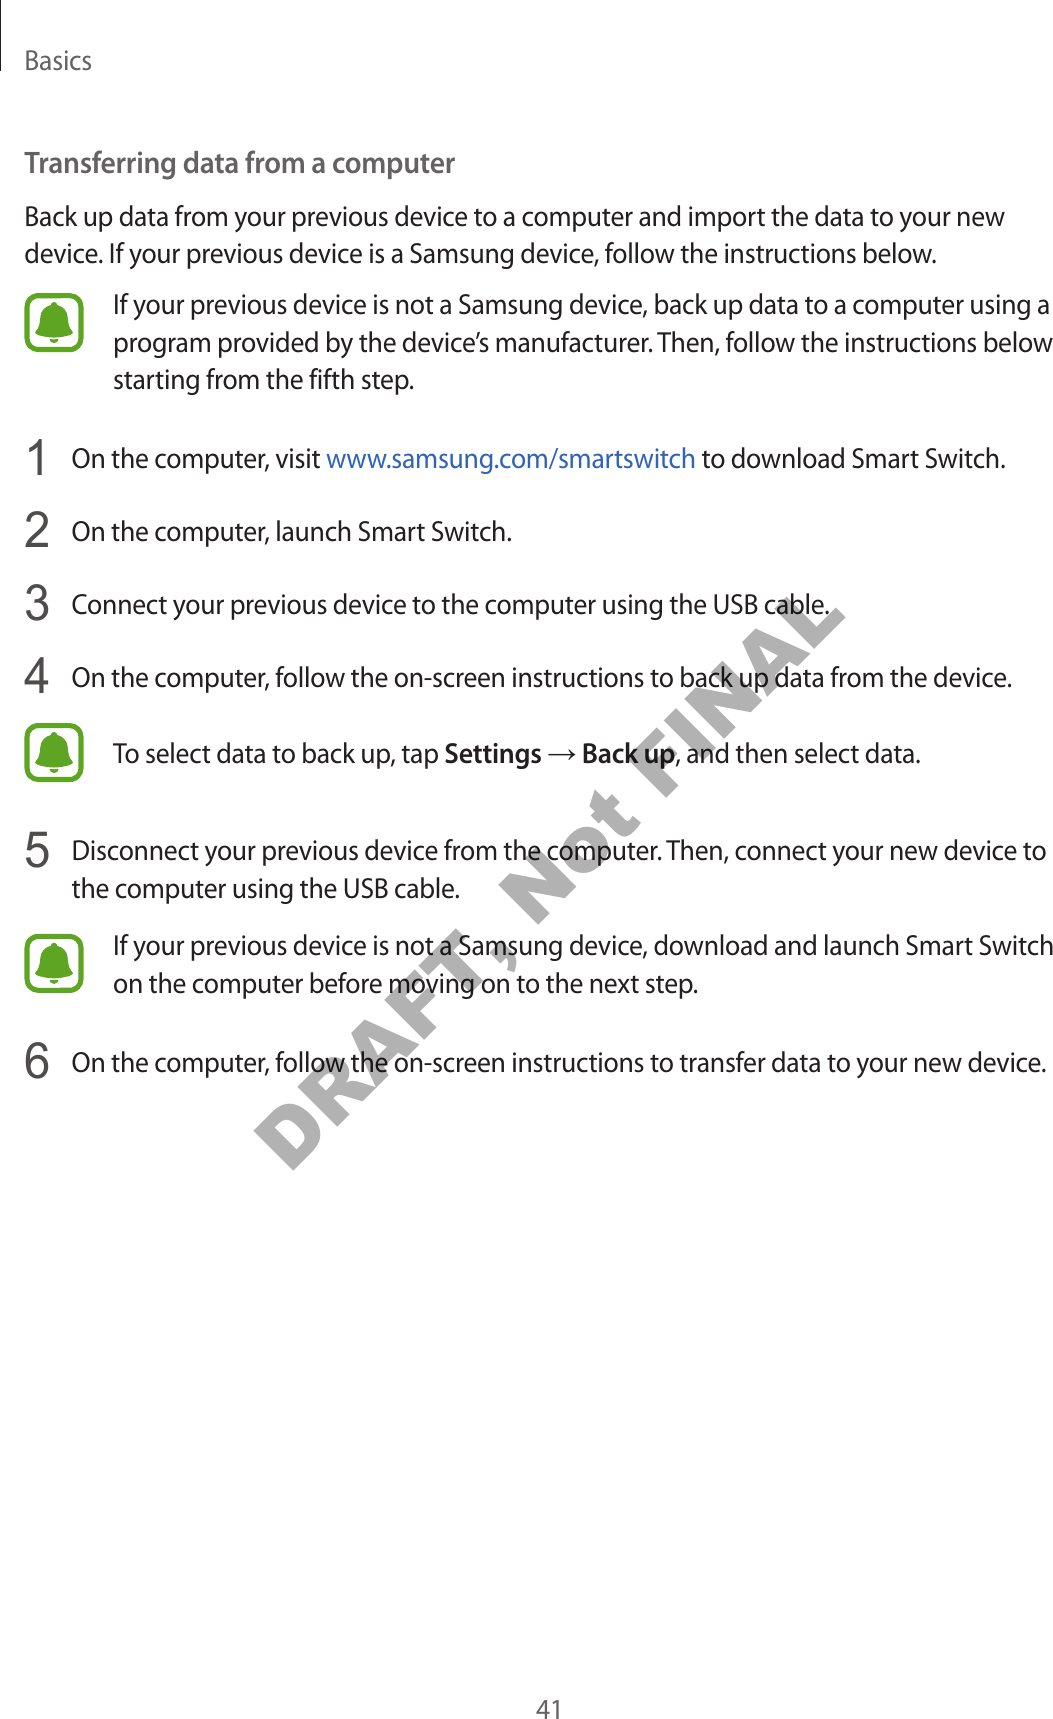 Basics41Transferring data fr om a c omputerBack up data from y our pr evious devic e to a c omput er and import the data to your new device . If your pr evious device is a Samsung device, follow the instructions below.If your previous device is not a Samsung devic e , back up data t o a comput er using a progr am pr o vided by the devic e’s manufacturer. T hen, f ollo w the instructions below starting from the fifth step.1  On the computer, visit www.samsung.com/smartswitch to download Smart Switch.2  On the computer, launch Smart Switch.3  Connect your pr evious device t o the comput er using the USB cable .4  On the computer, follow the on-scr een instructions to back up data fr om the device.To select data to back up , tap Settings → Back up, and then select data.5  Disconnect your previous devic e fr om the comput er. Then, connect your new device to the computer using the USB cable .If your previous device is not a Samsung devic e , do wnload and launch Smart Switch on the computer bef or e mo ving on t o the next step.6  On the computer, follow the on-scr een instructions to transf er da ta to y our new devic e .DRAFT, Not FINAL